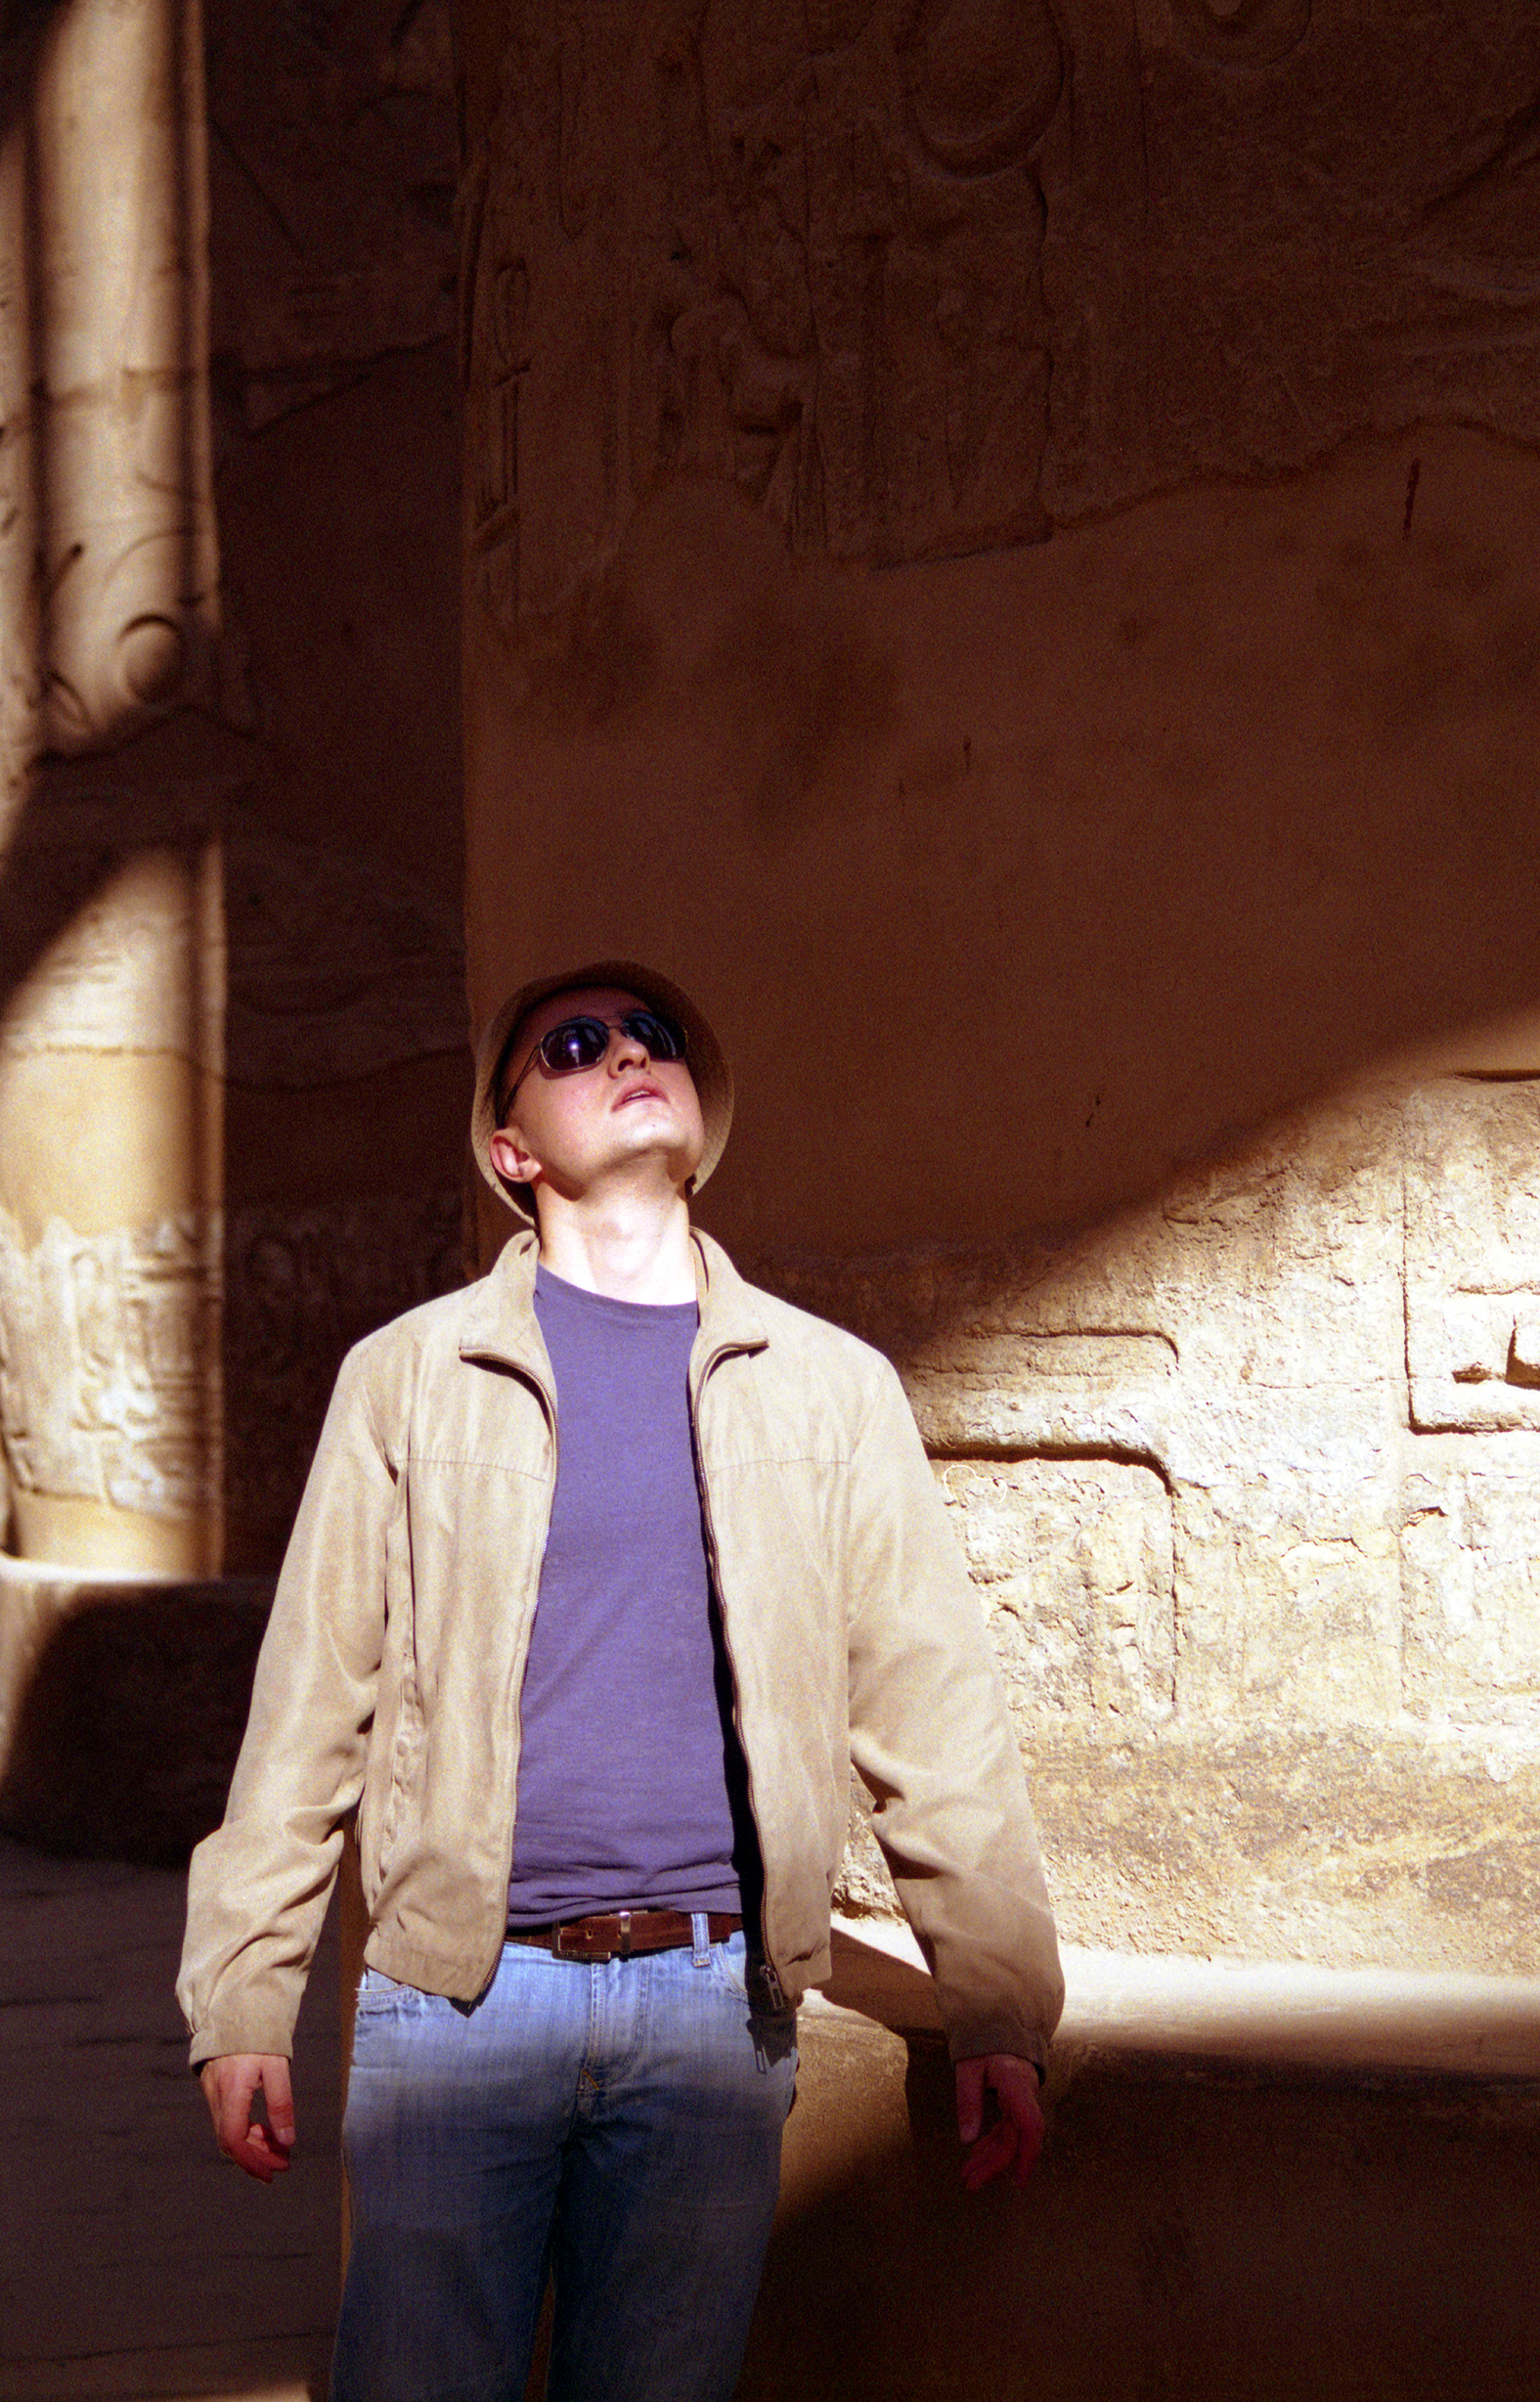 Location scouting in the Valley of the Kings, Egypt.